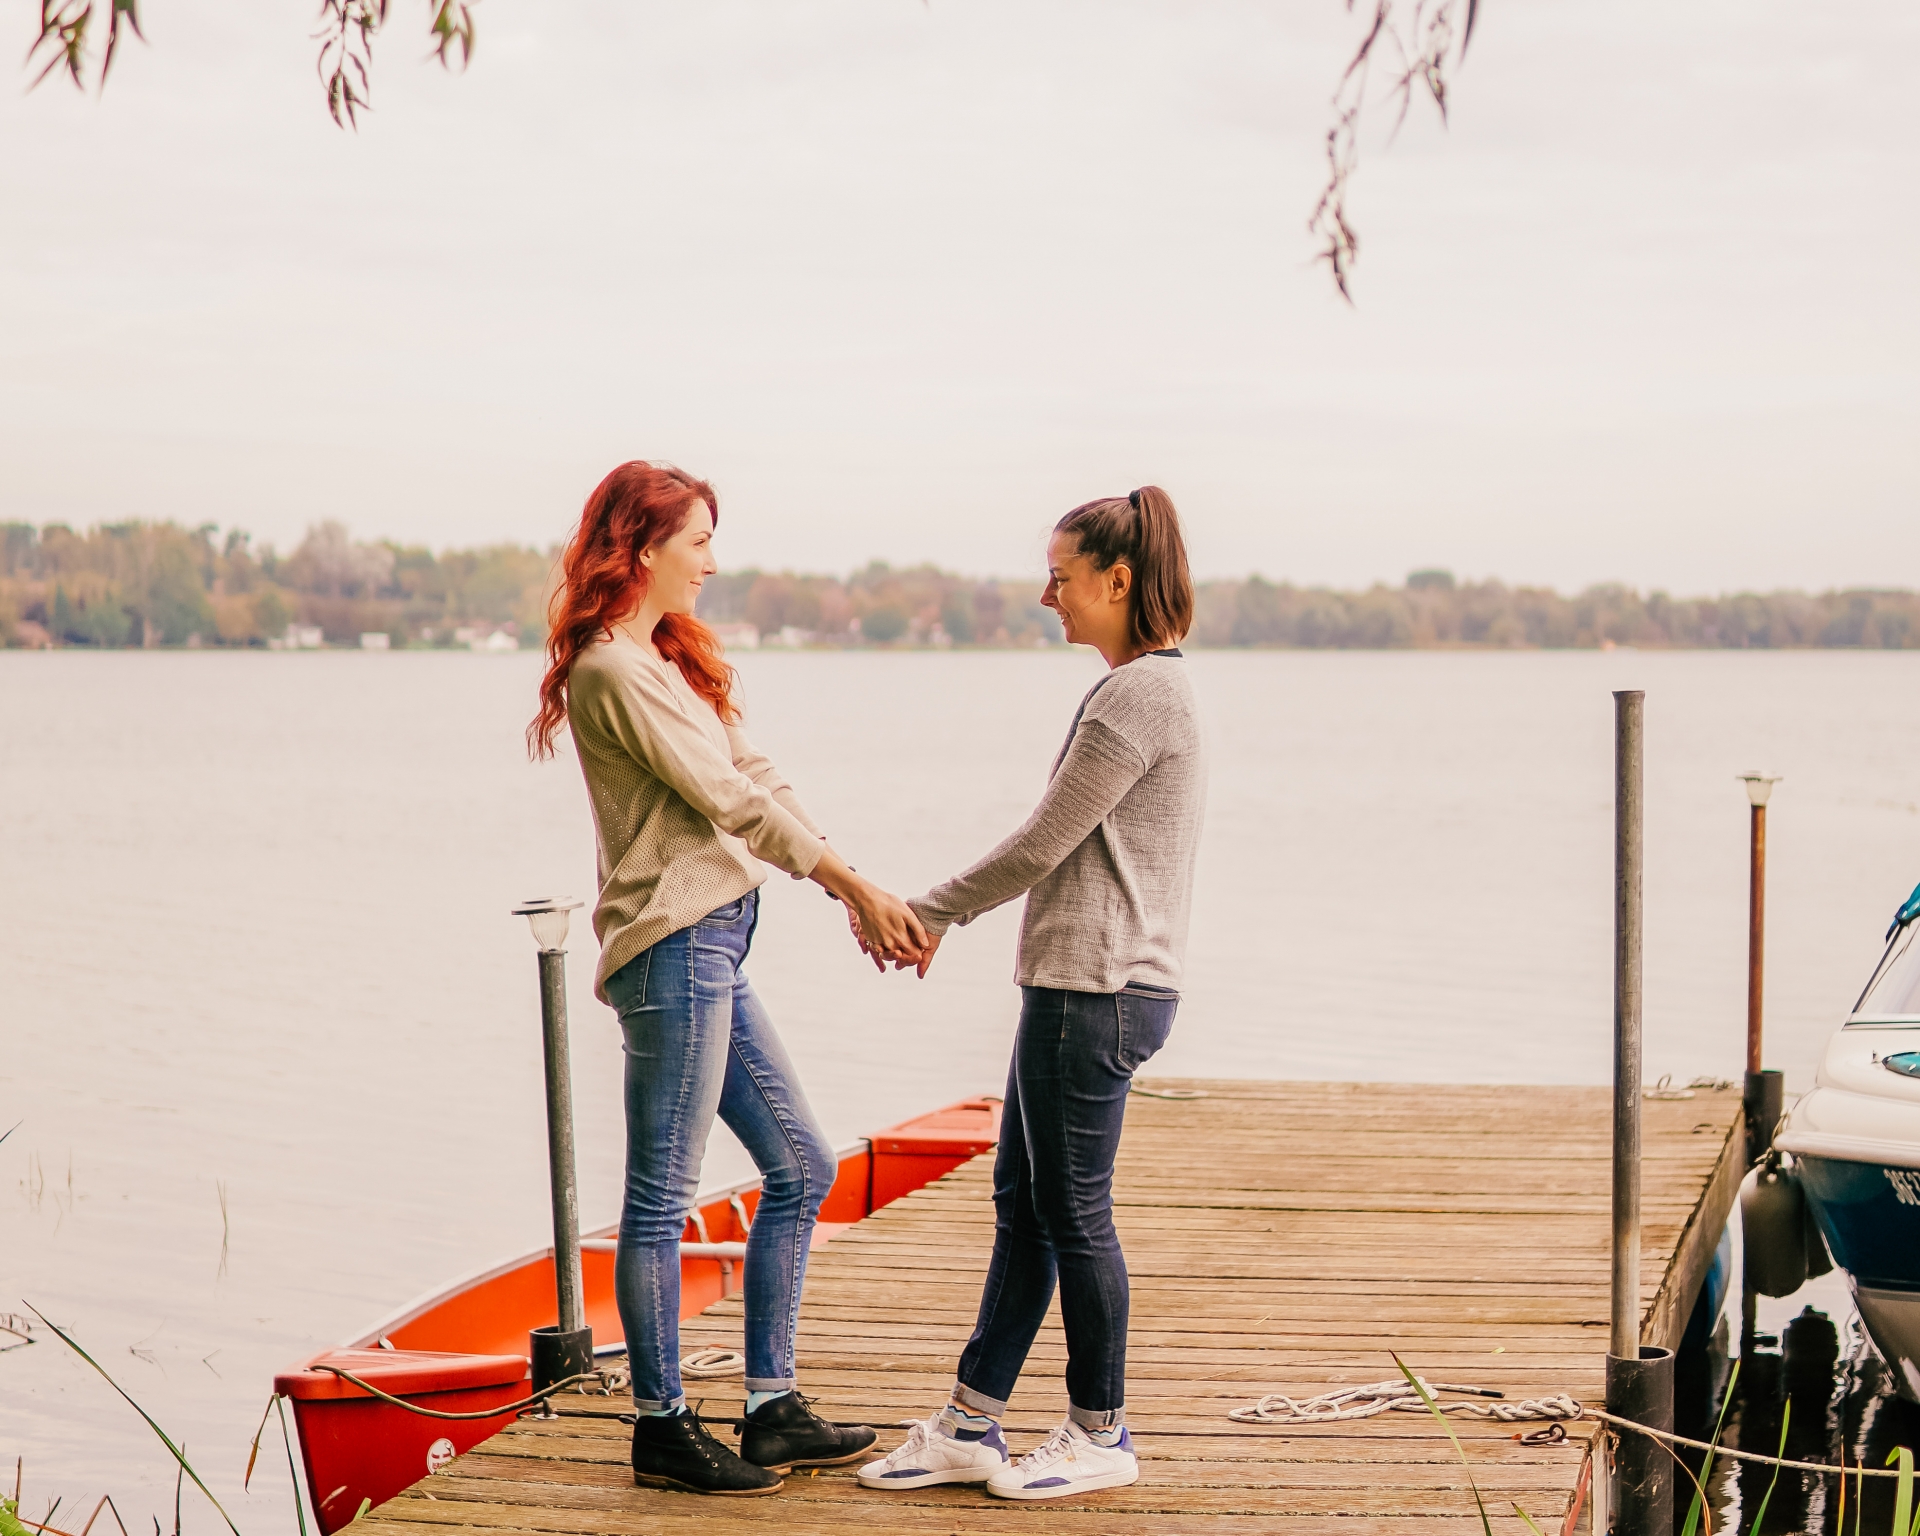 Lesbians Hand in Hand at Lake